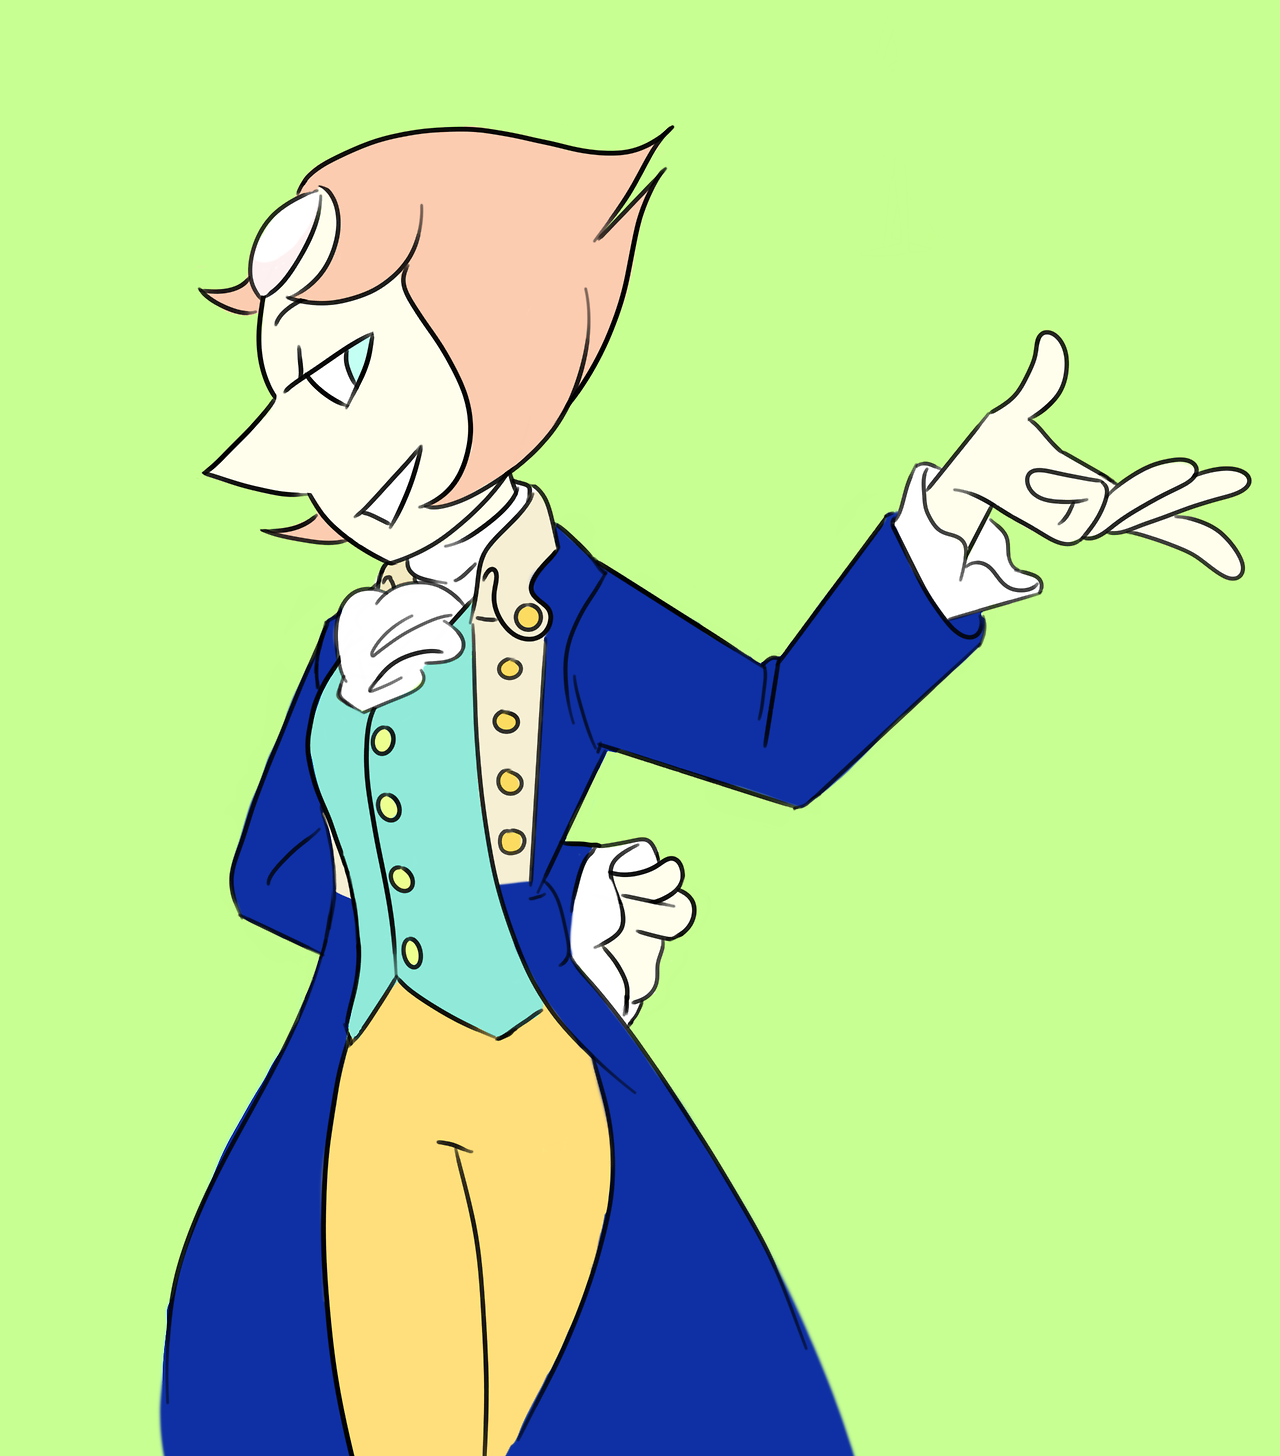 The lovely Pearl as your’s truly, Alexander Hamilton! :D